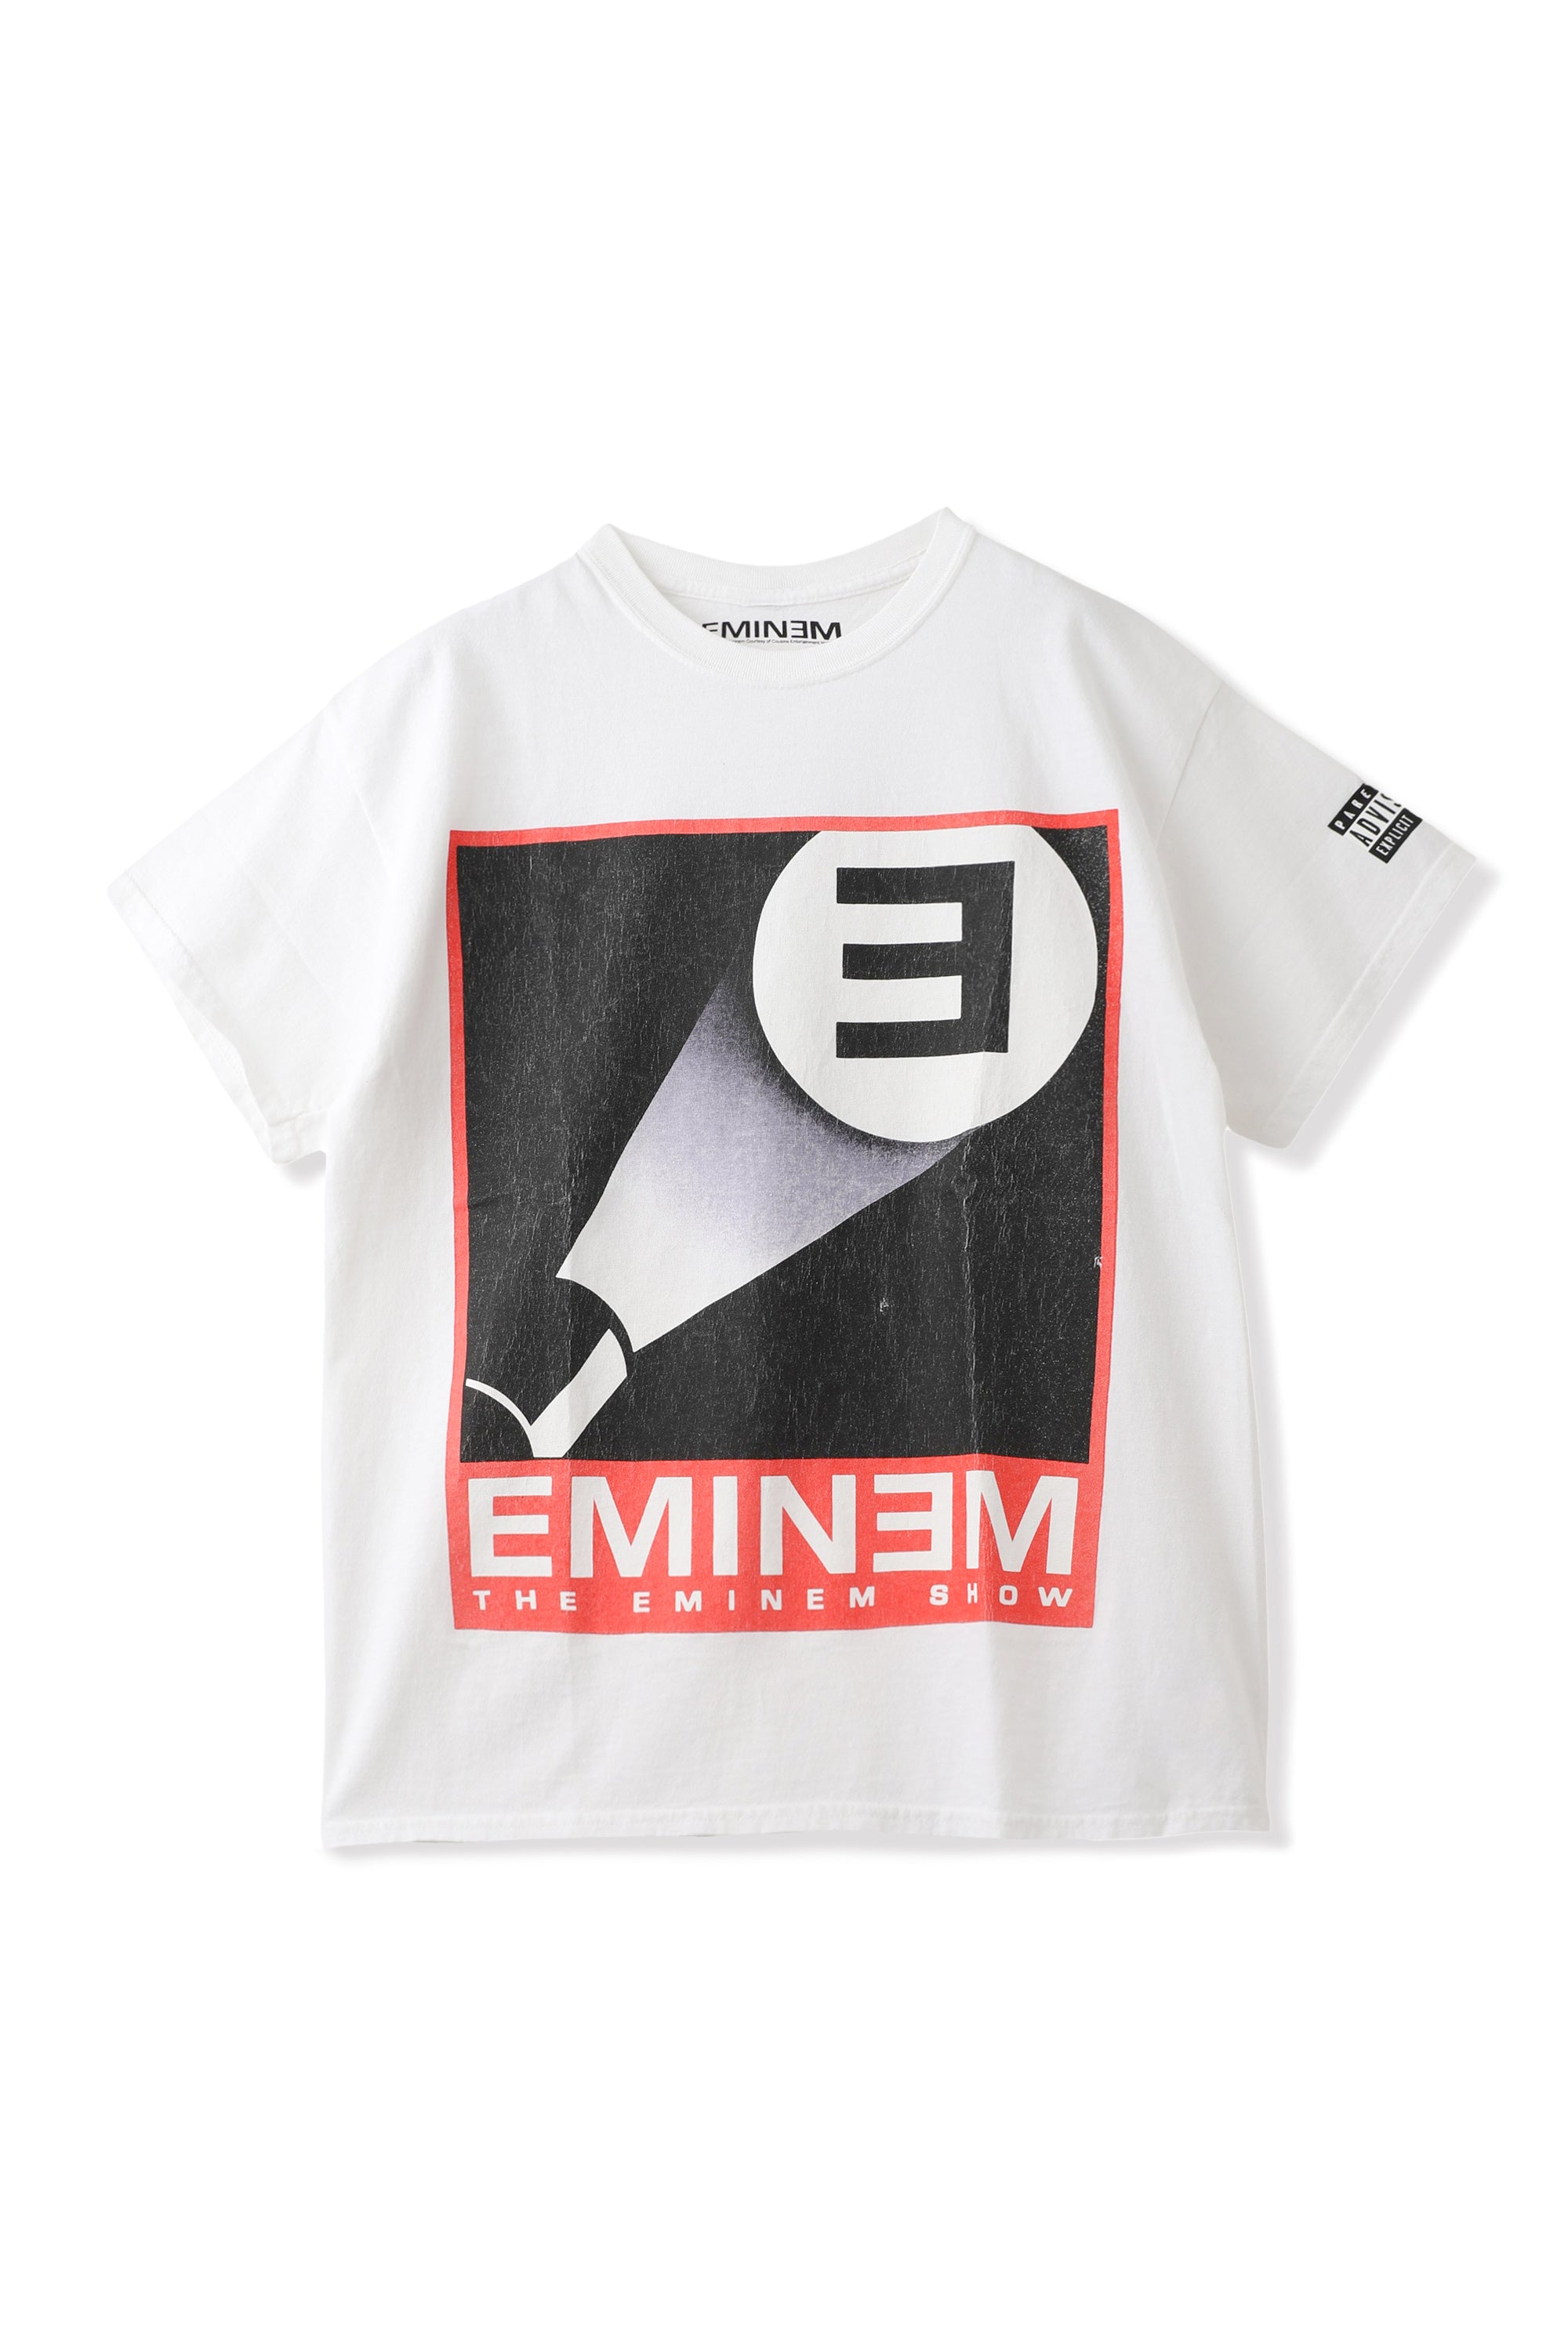 × EMINEM SHOW AFTERMATH RECORDS 2002 TEE